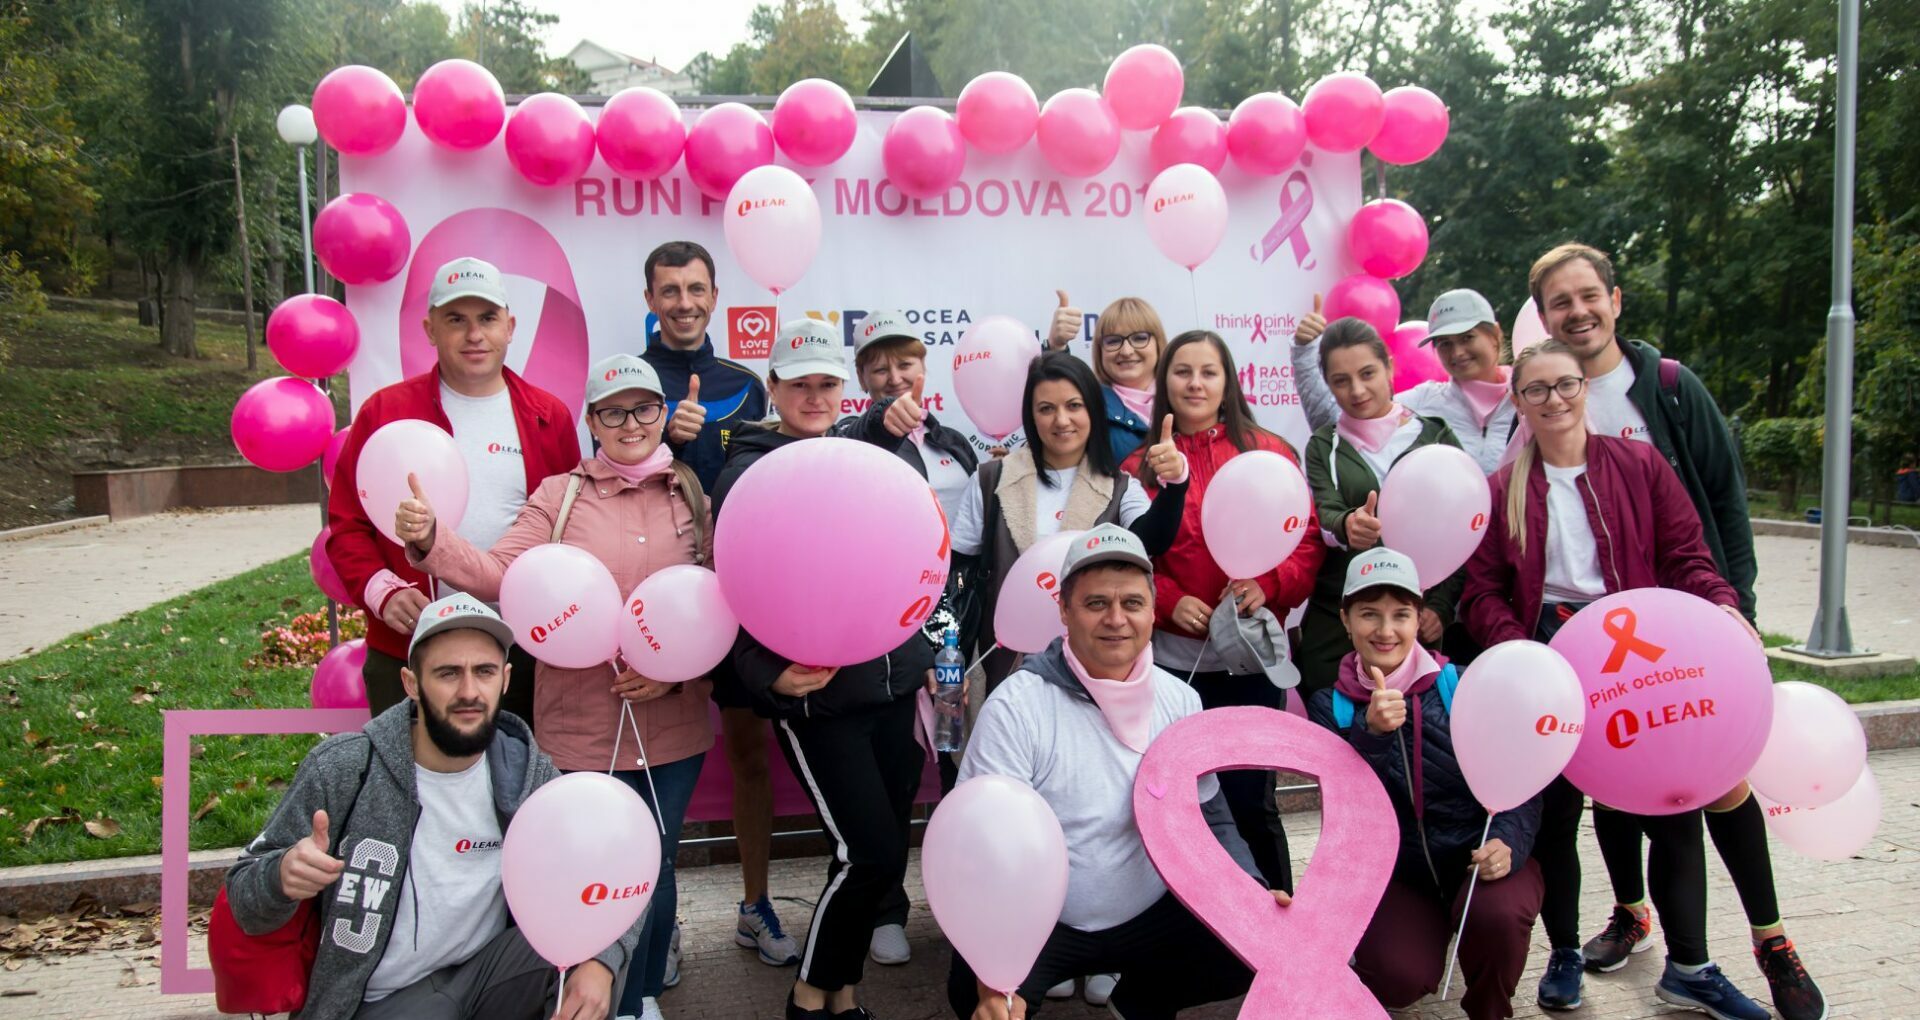 Race For The Cure- Run Pink Moldova Organizes a National Event For an International Community